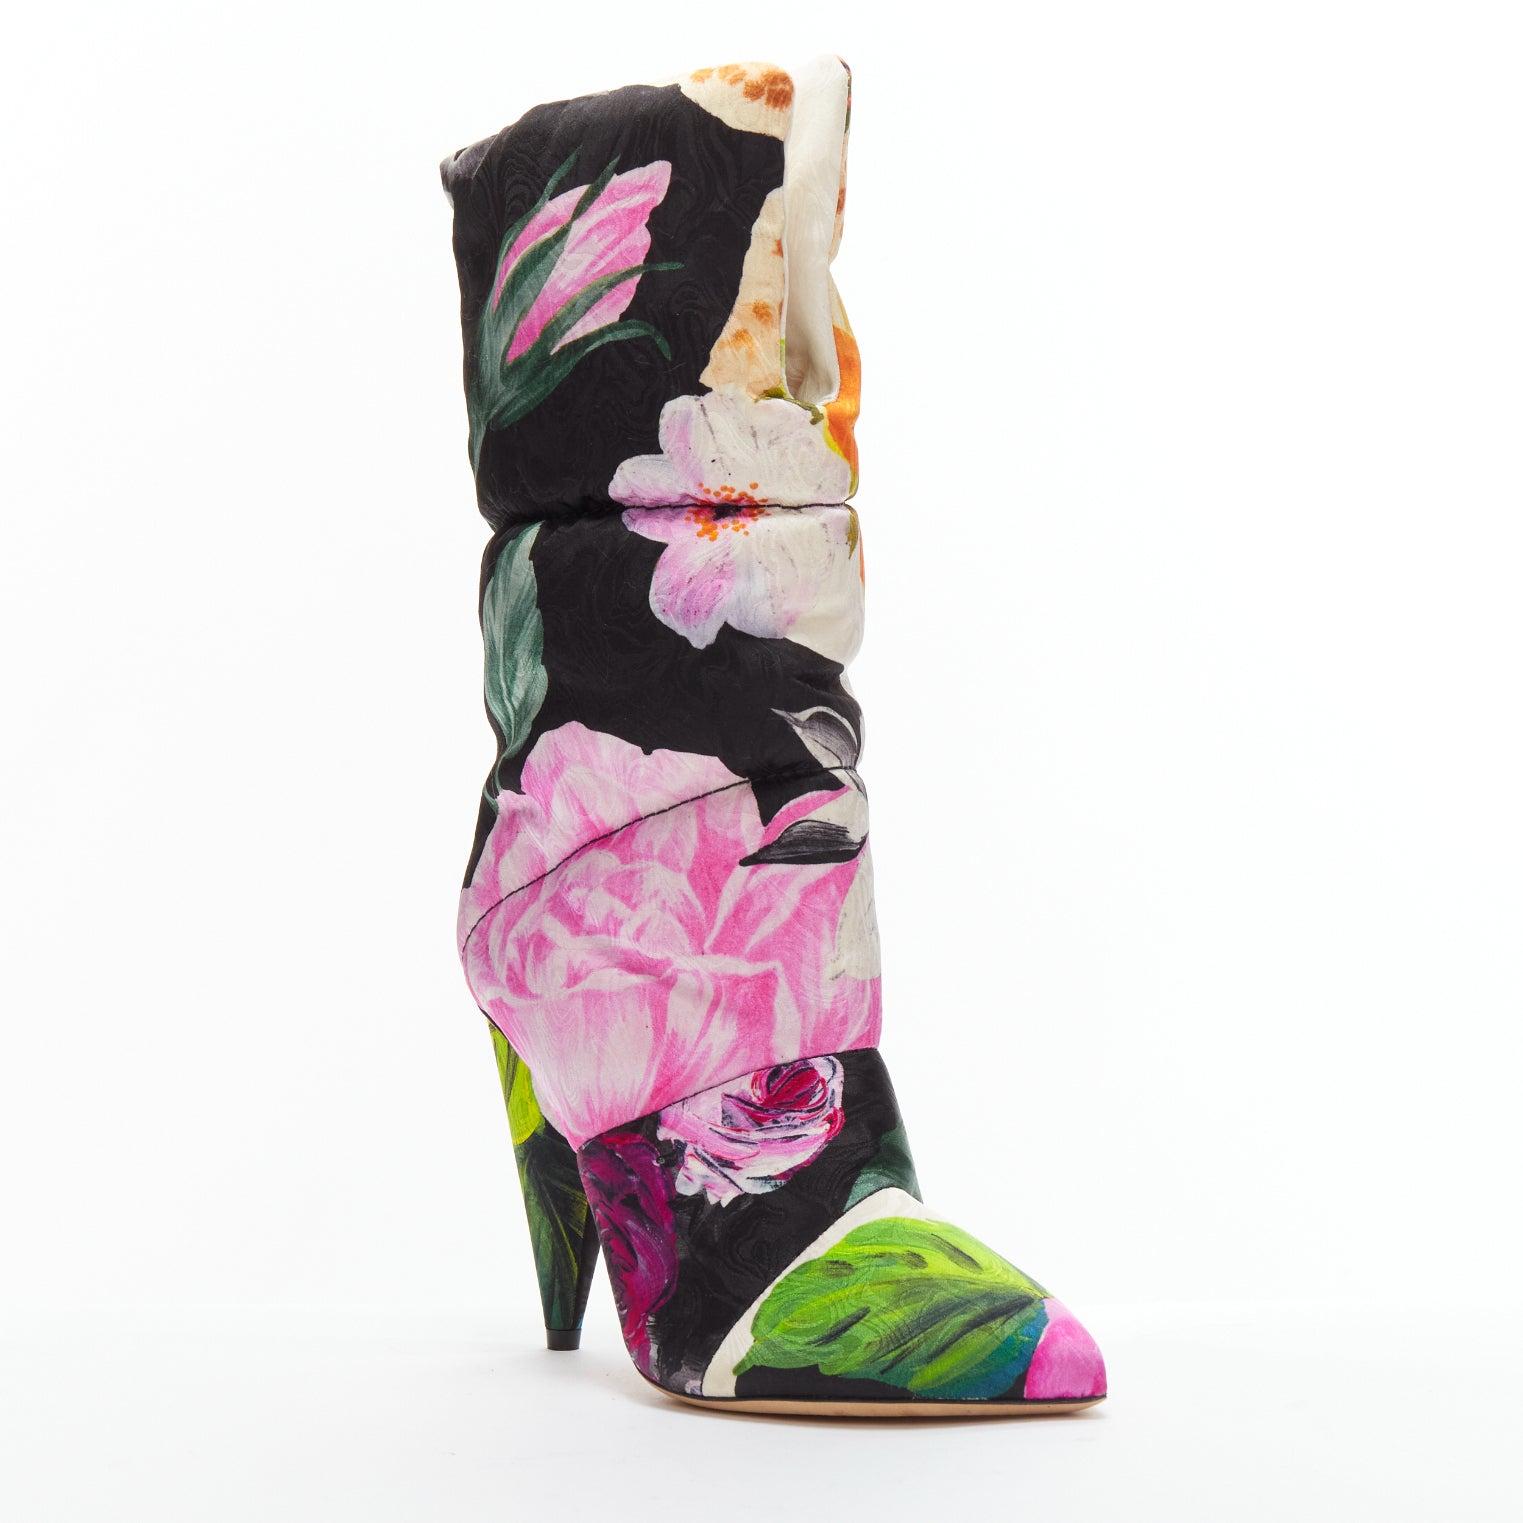 JIMMY CHOO Off-White Sara 100 floral brocade padded boots EU38.5
Reference: BSHW/A00179
Brand: Jimmy Choo
Model: Sara 100
Collection: Off-White - Runway
Material: Fabric
Color: Multicolour
Pattern: Floral
Closure: Slip On
Lining: Black Leather
Extra